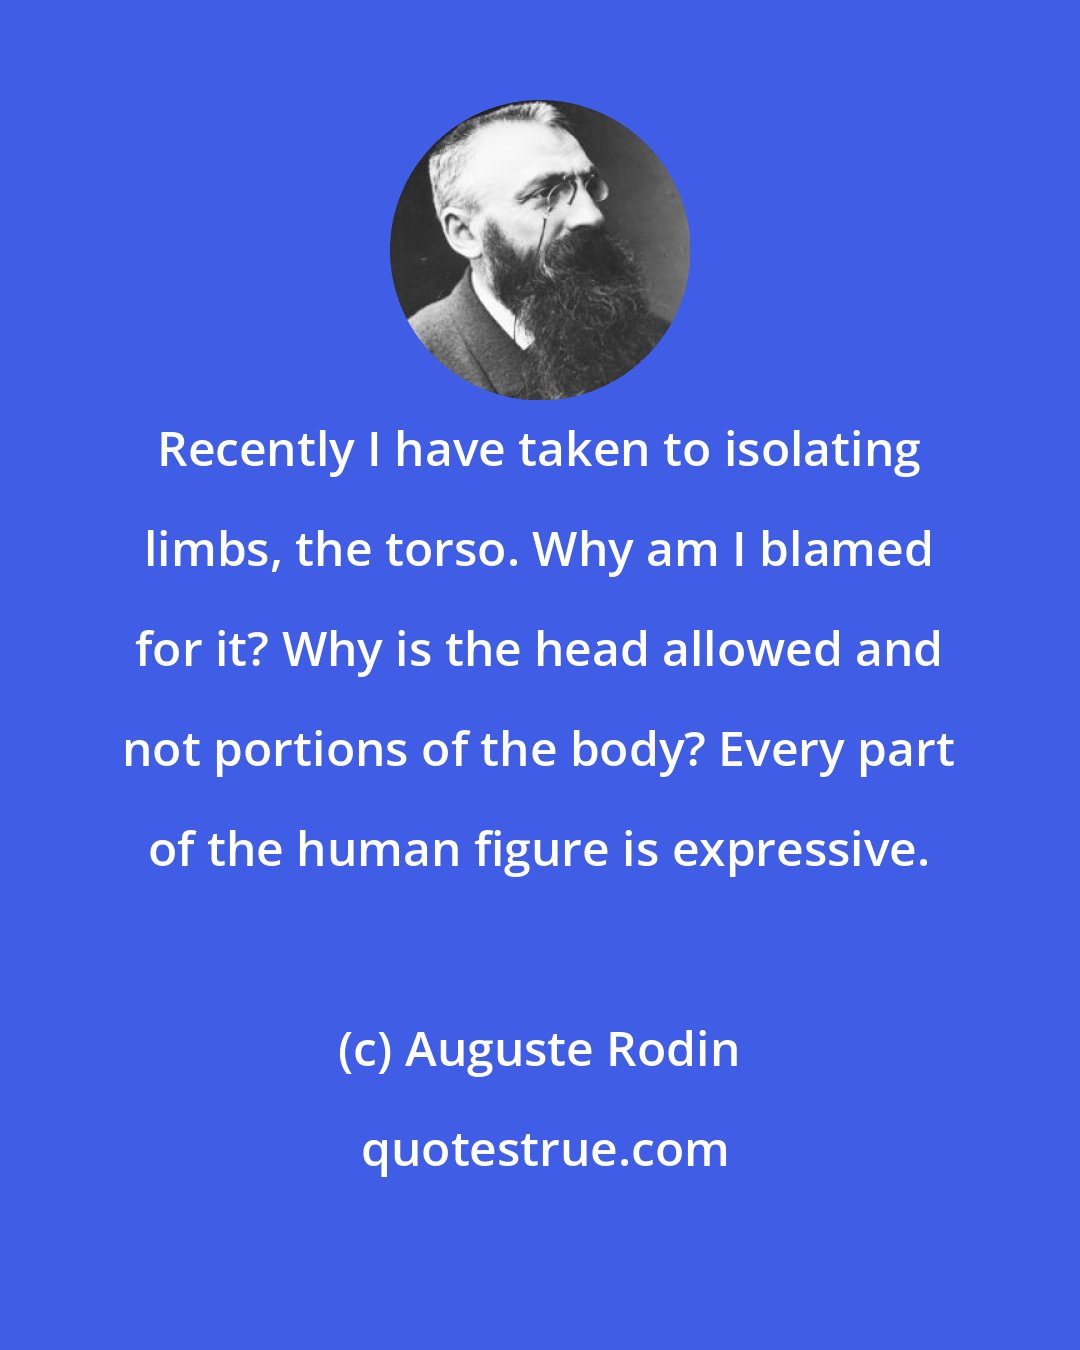 Auguste Rodin: Recently I have taken to isolating limbs, the torso. Why am I blamed for it? Why is the head allowed and not portions of the body? Every part of the human figure is expressive.